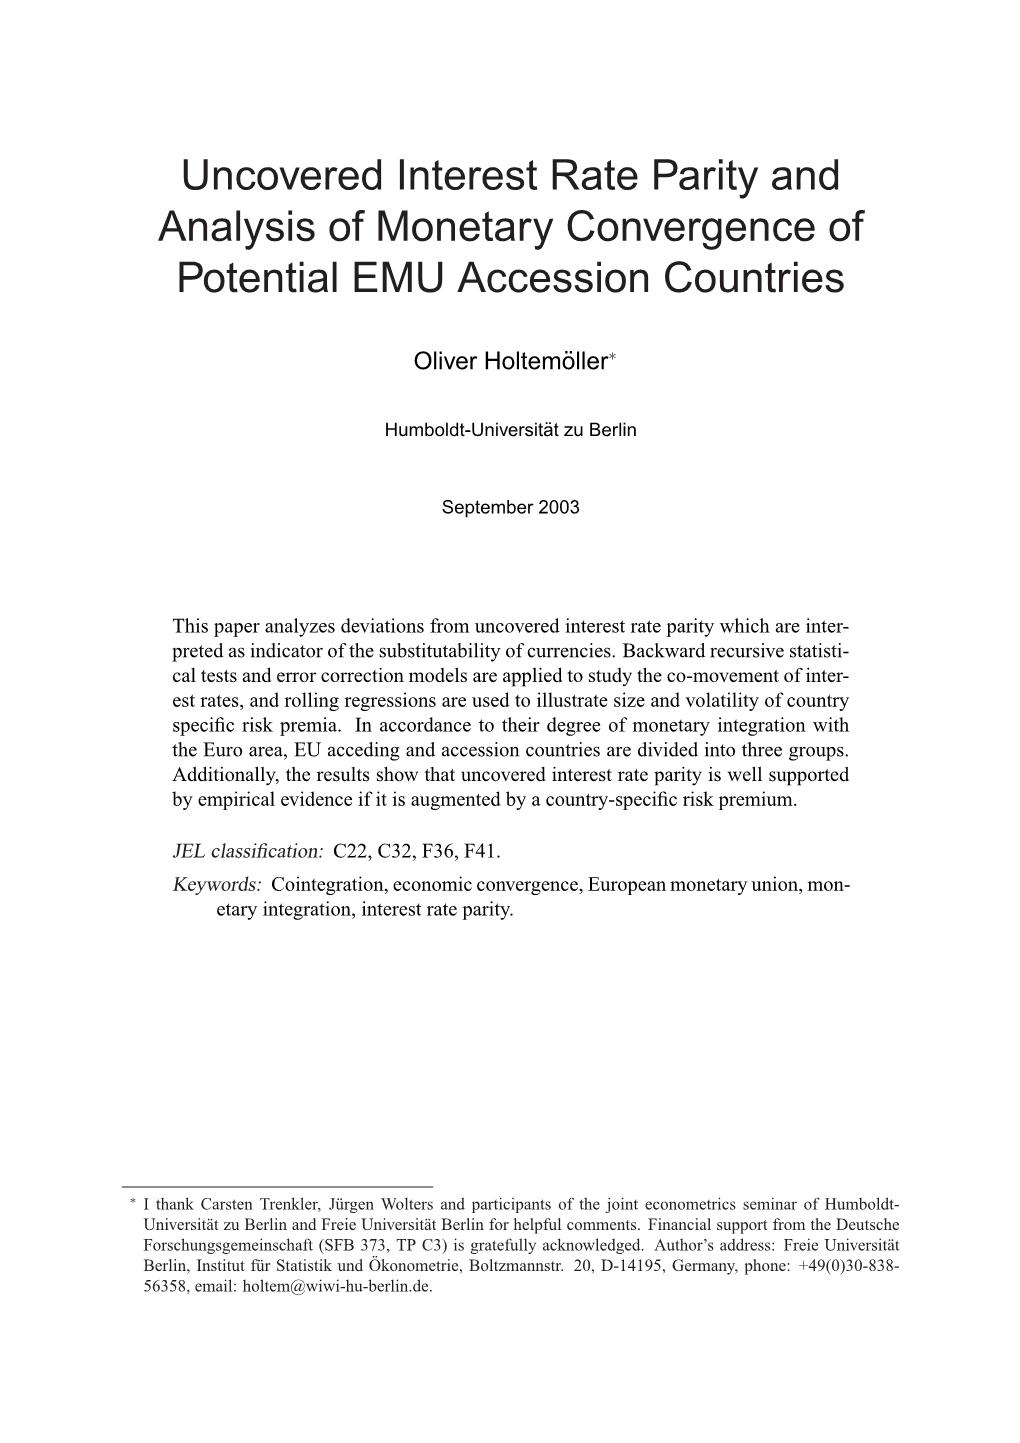 Uncovered Interest Rate Parity and Analysis of Monetary Convergence of Potential EMU Accession Countries